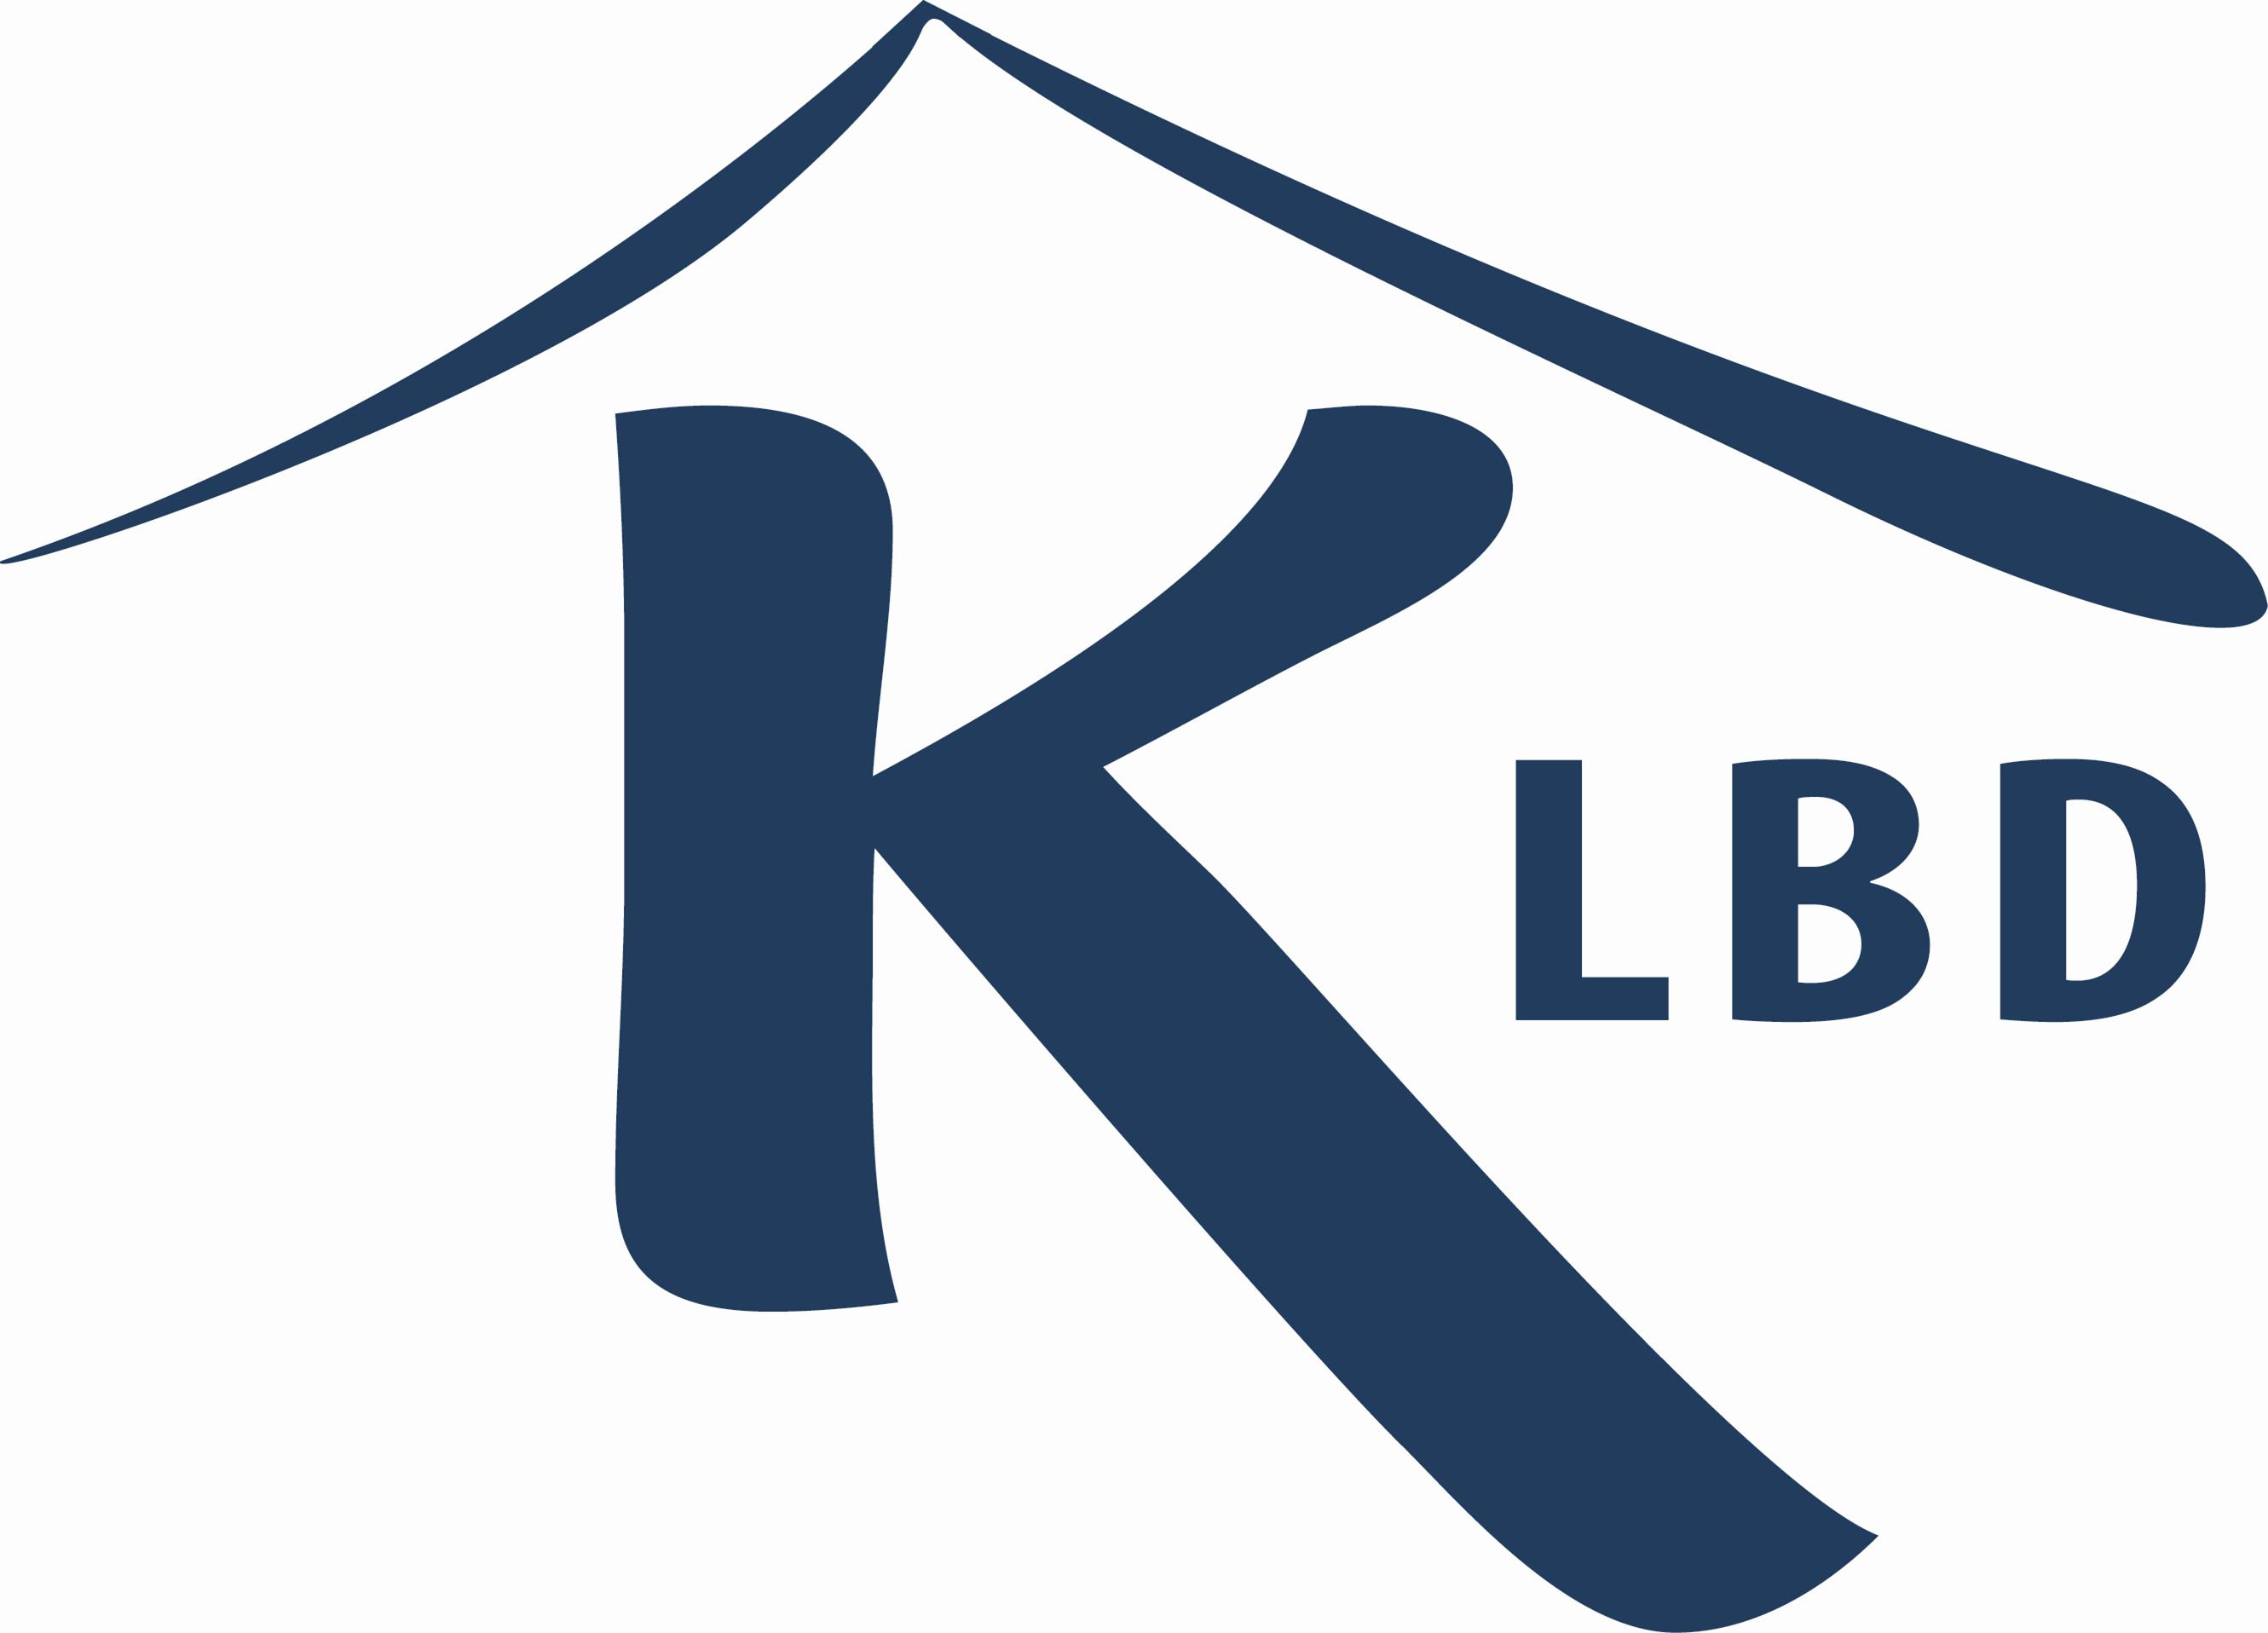 A stylized graphic of a clothes hanger forming the letter 'k' with the text "lbd" beneath it.